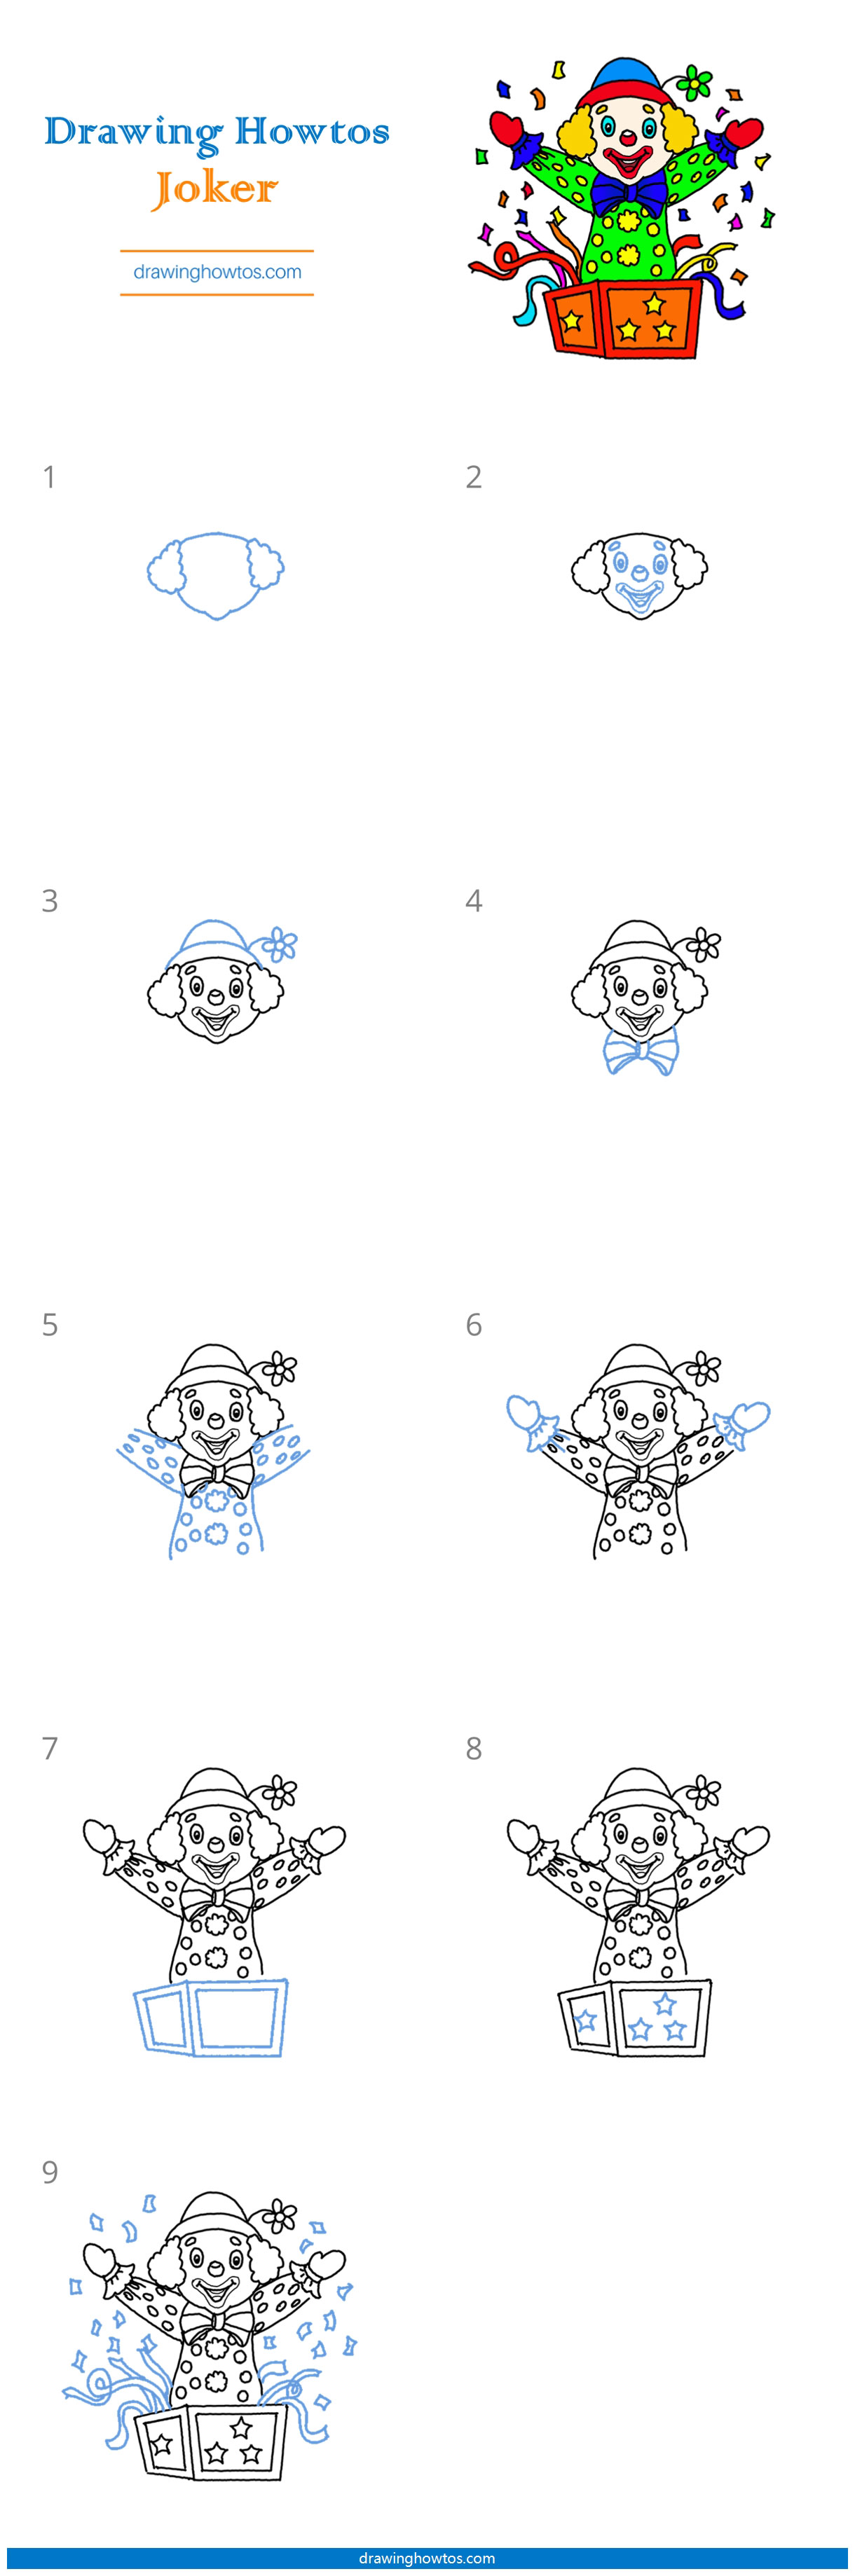 How to Draw a Joker Step by Step